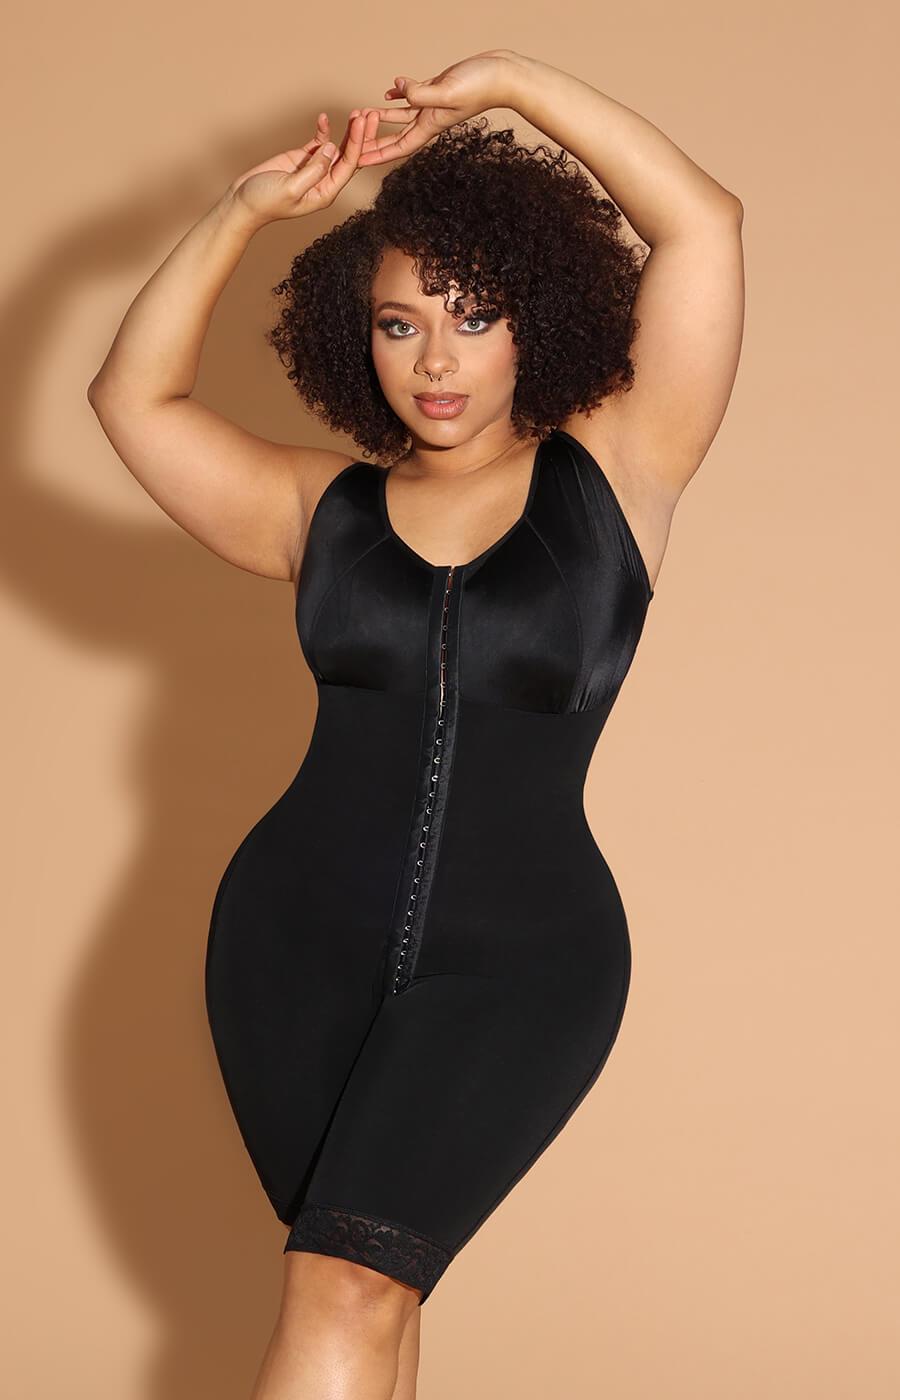 AirSlim® Full Coverage Firm Control Bodysuit with Thigh Slimmer